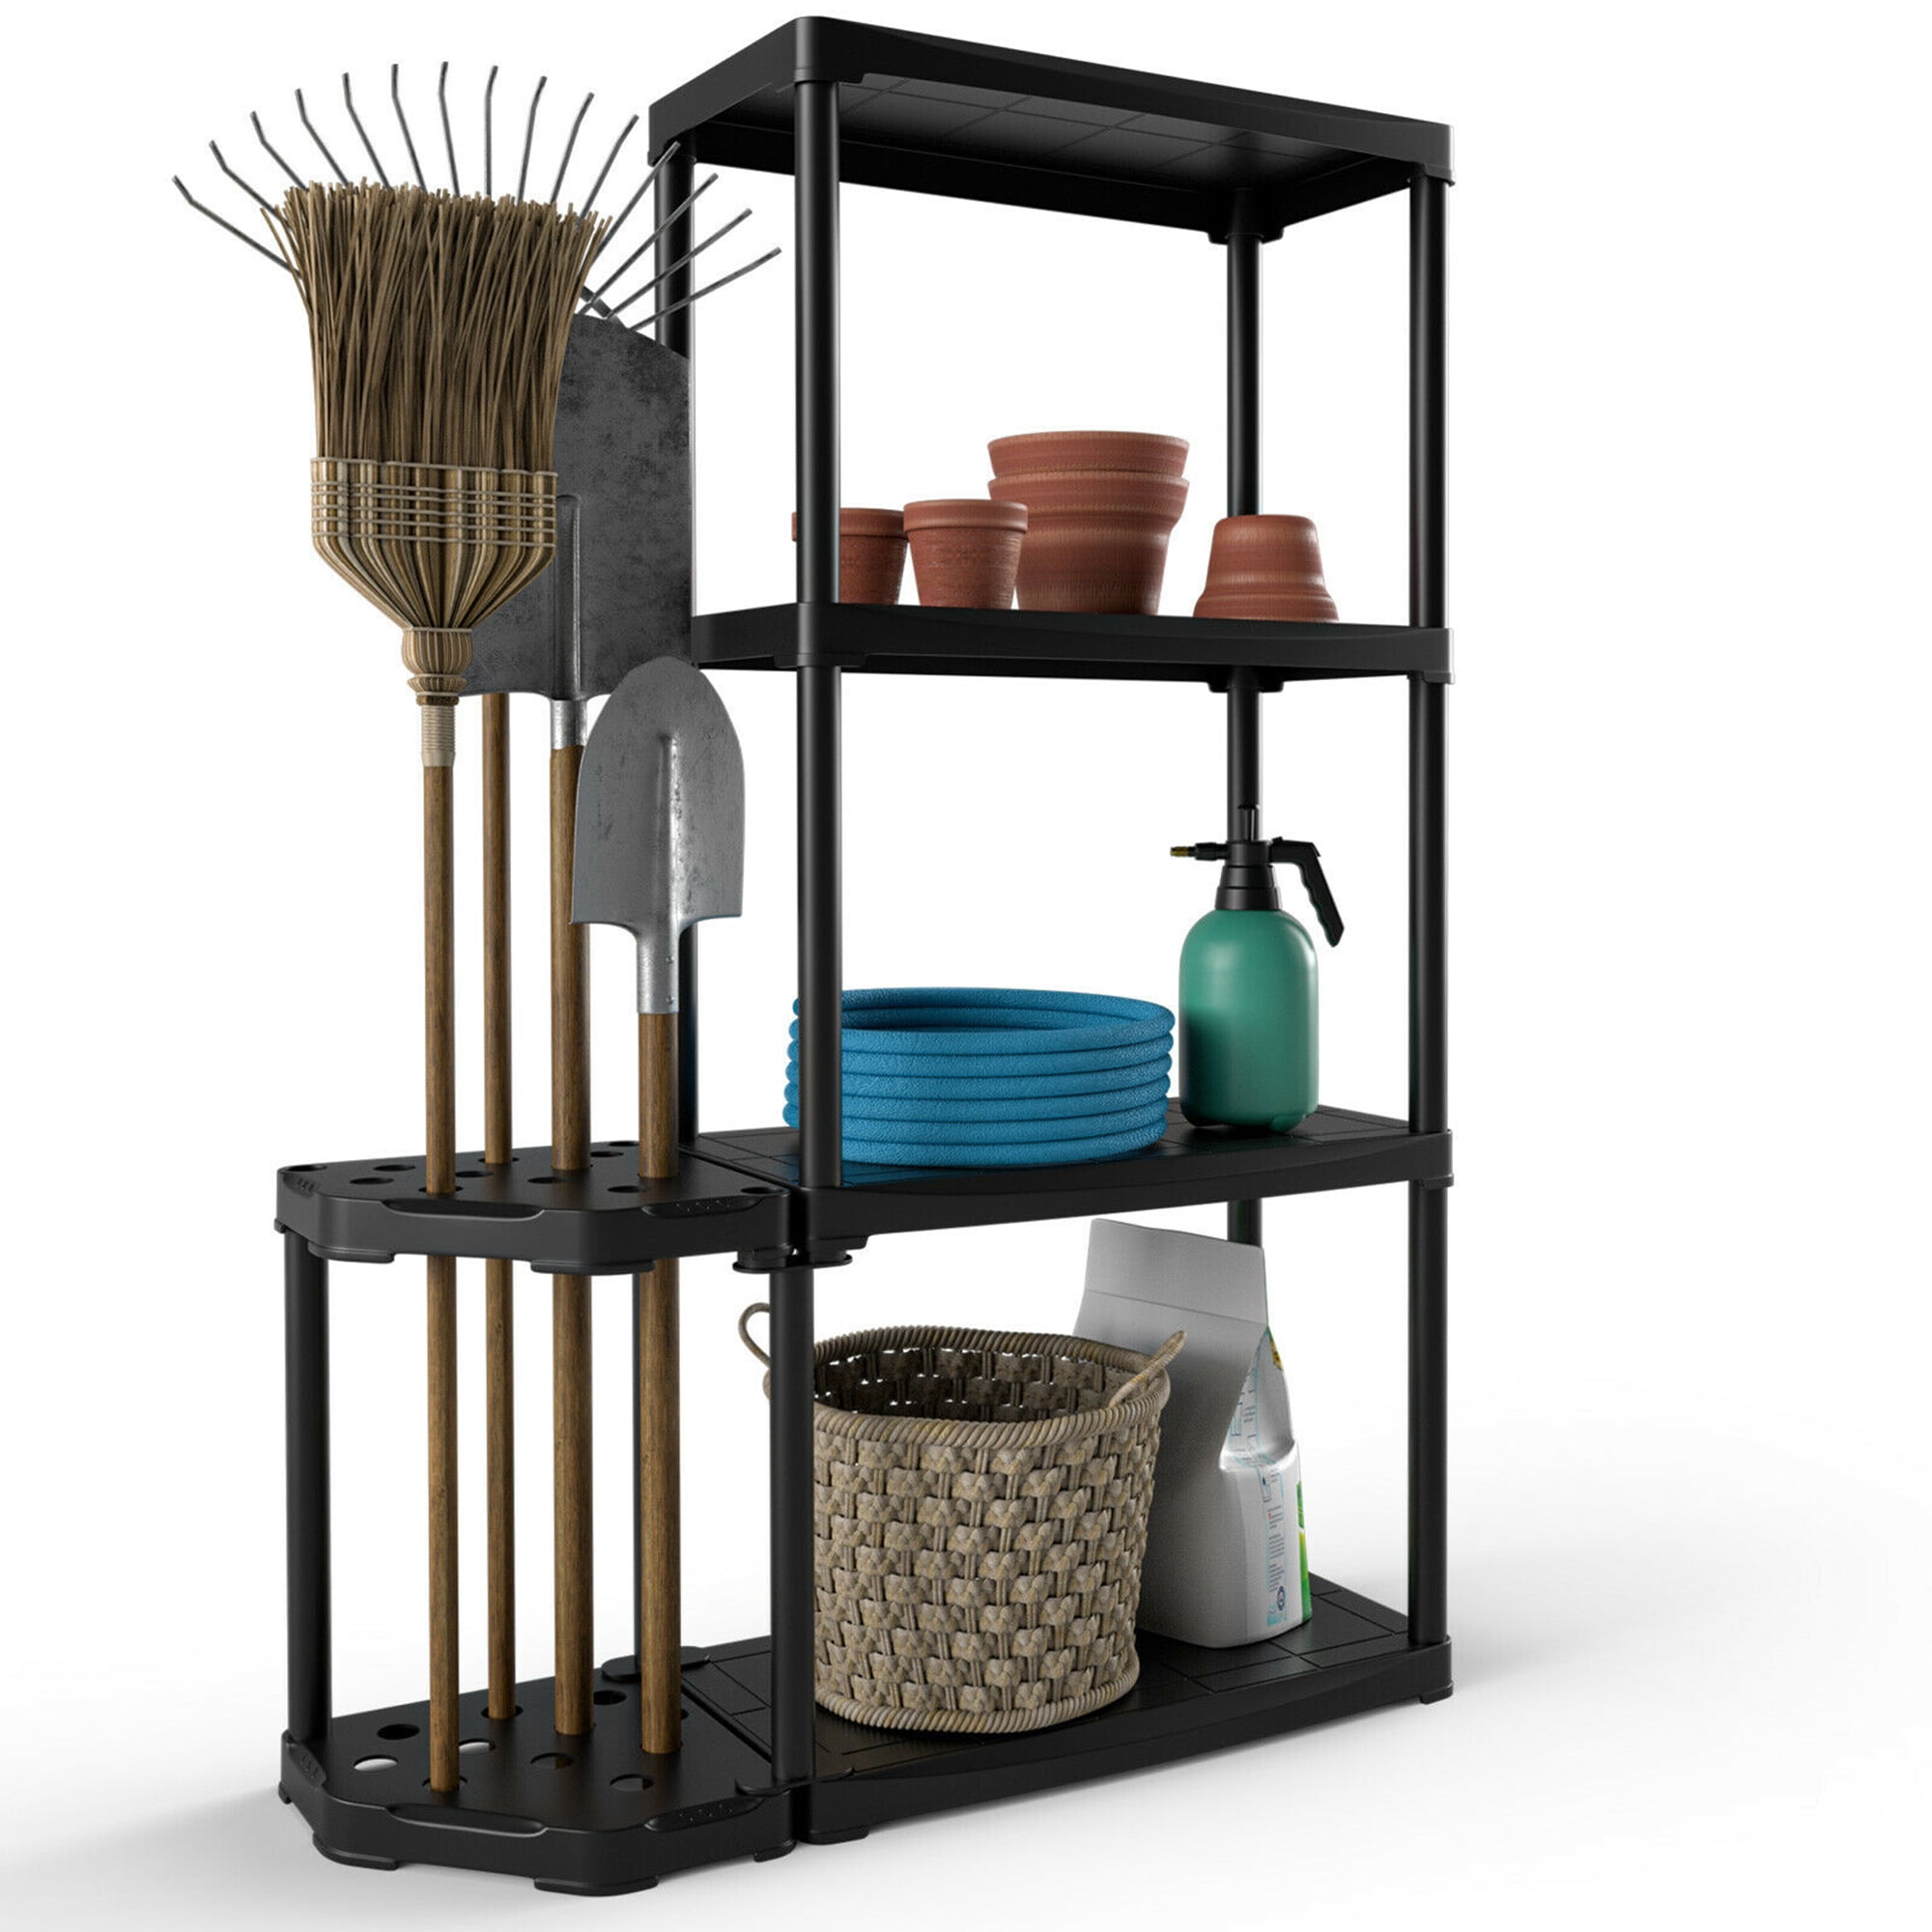 Details about   Rubbermaid 30-Tool Corner Rack by Rubbermaid Inc 